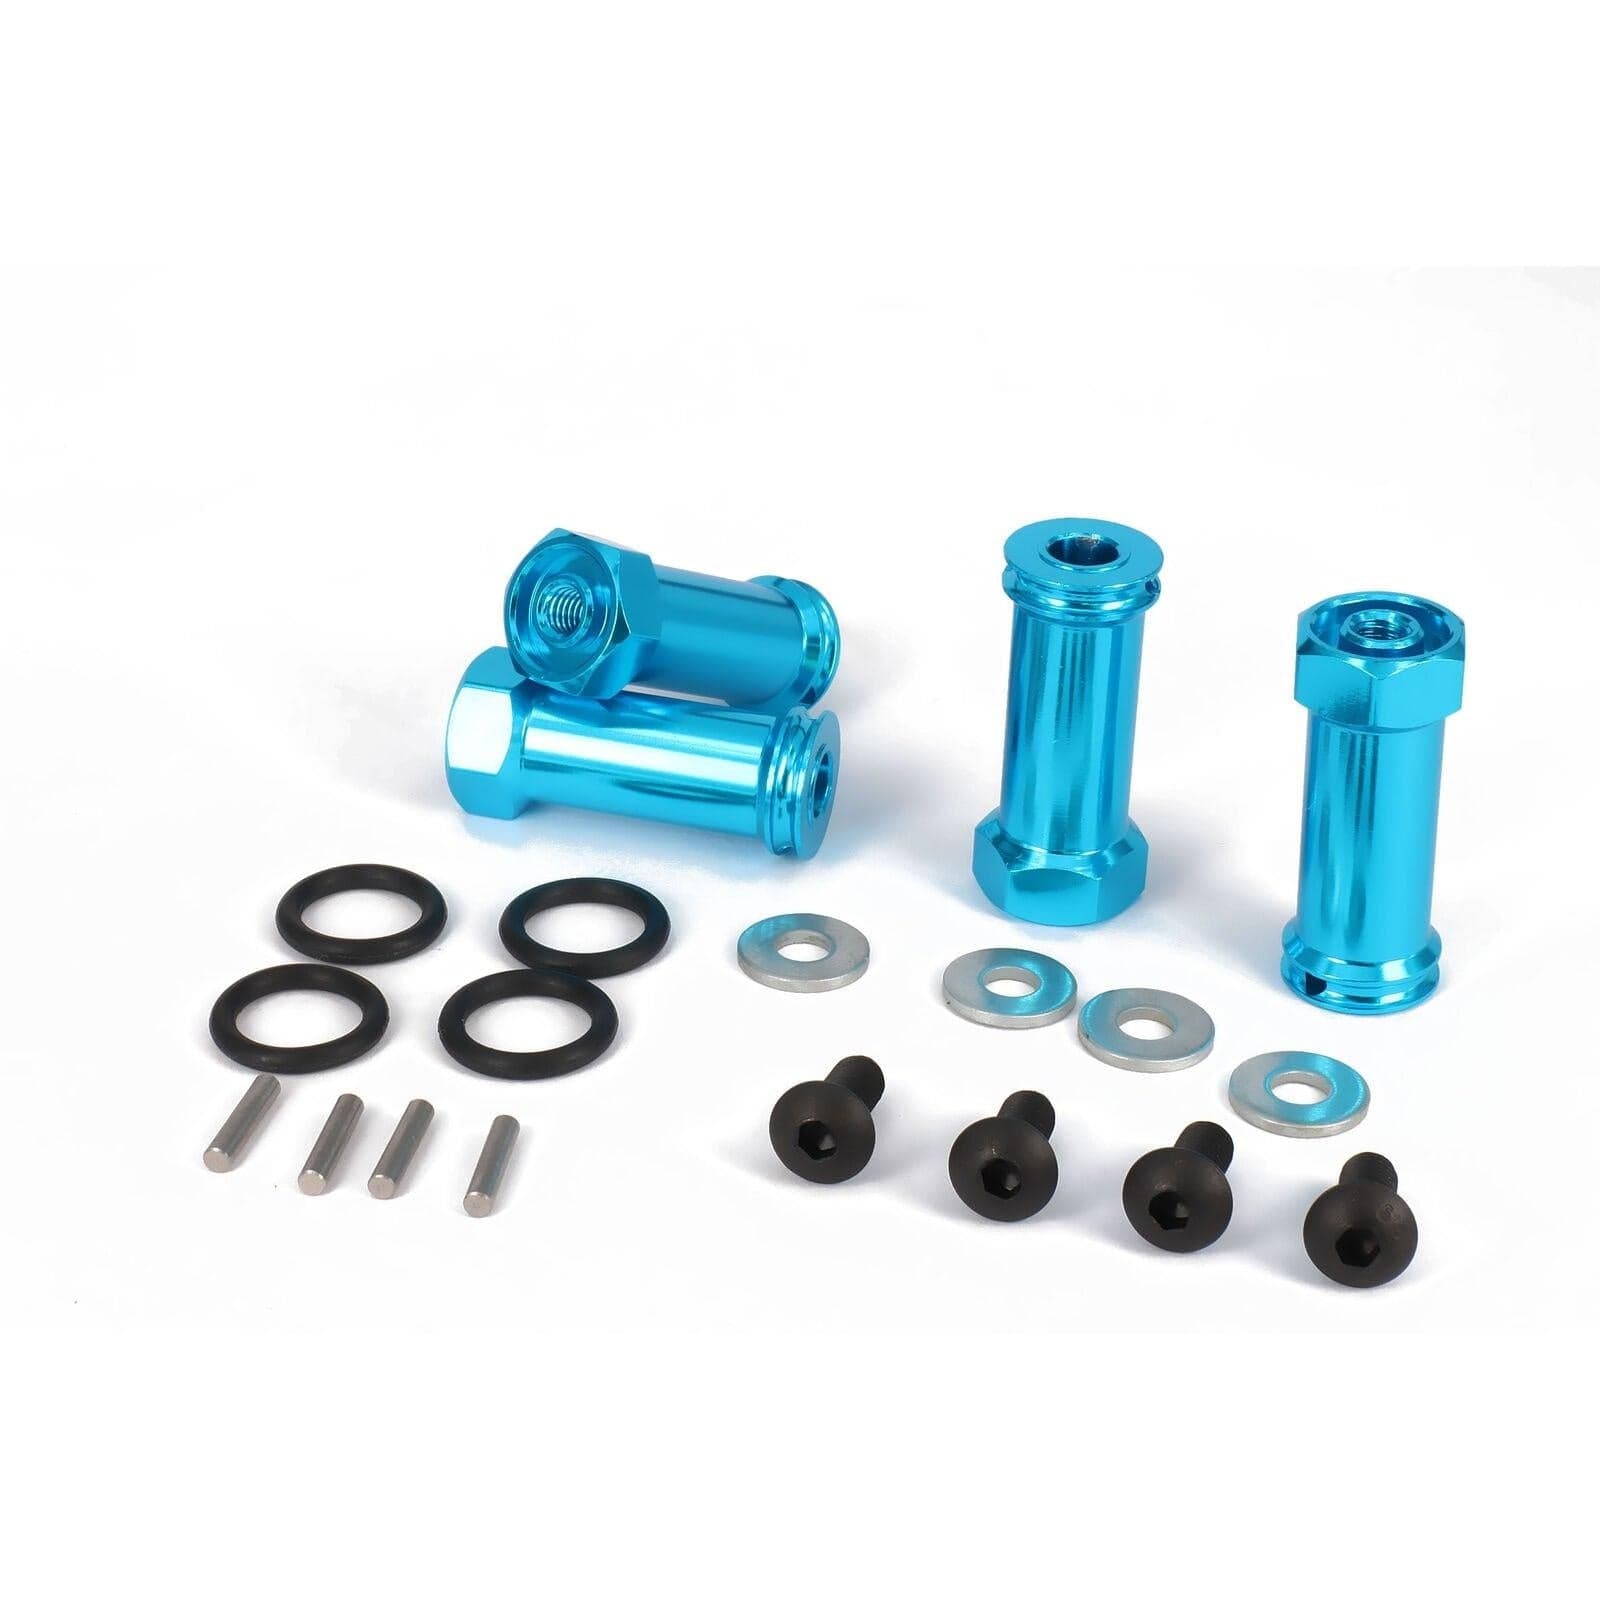 RCAWD TRAXXAS UPGRADE PARTS RCAWD 12mm Hex Hub Extension Adapter 30mm Length For RC 1/10 Traxxas Slash 5807 Blue